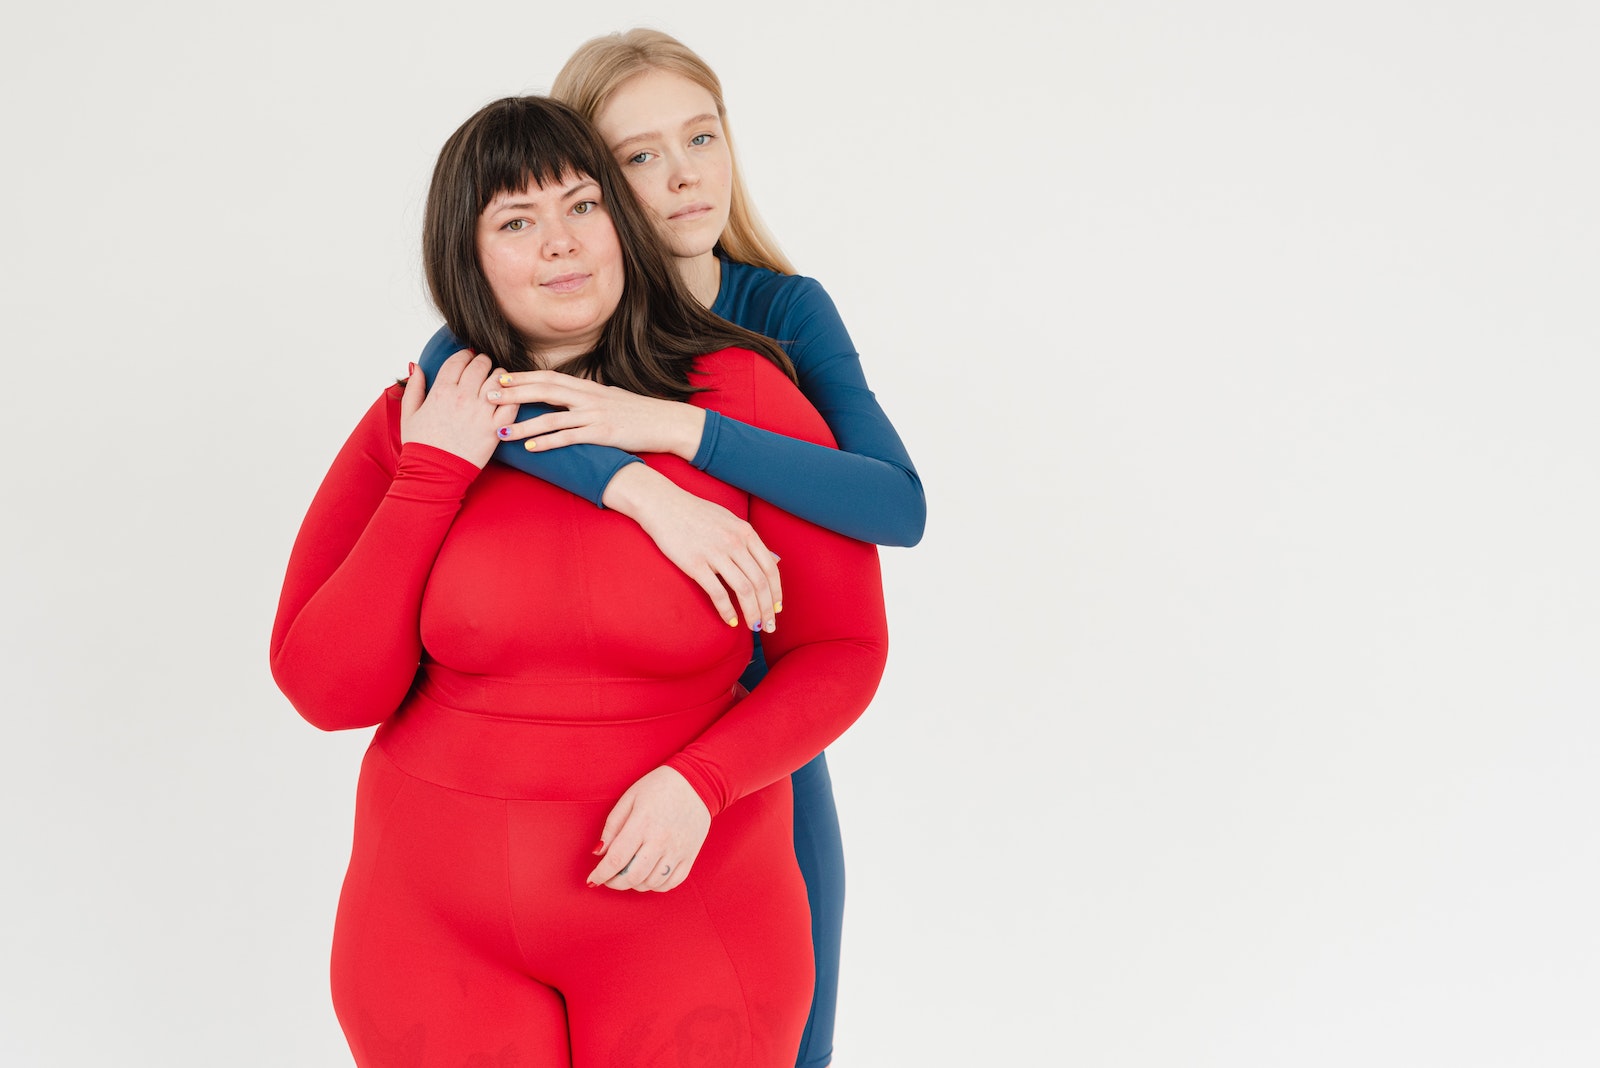 Tender women with different body types in studio